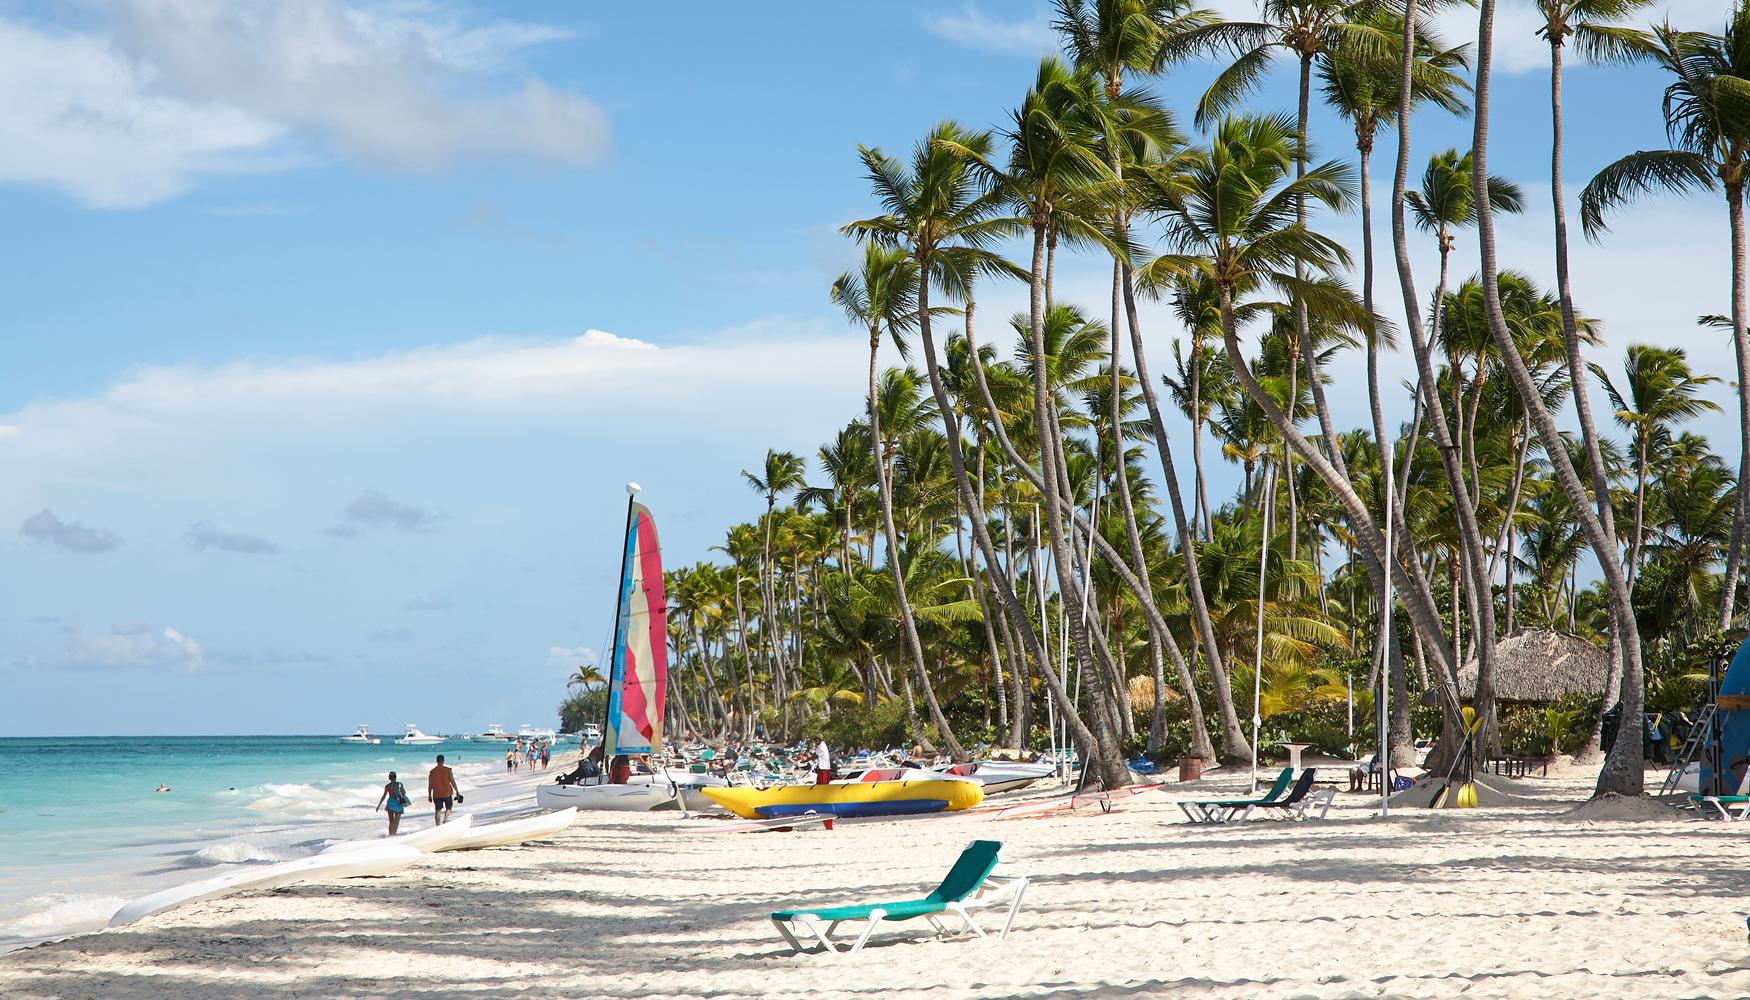 Punta Cana stands out with 71 occupancy in recent days